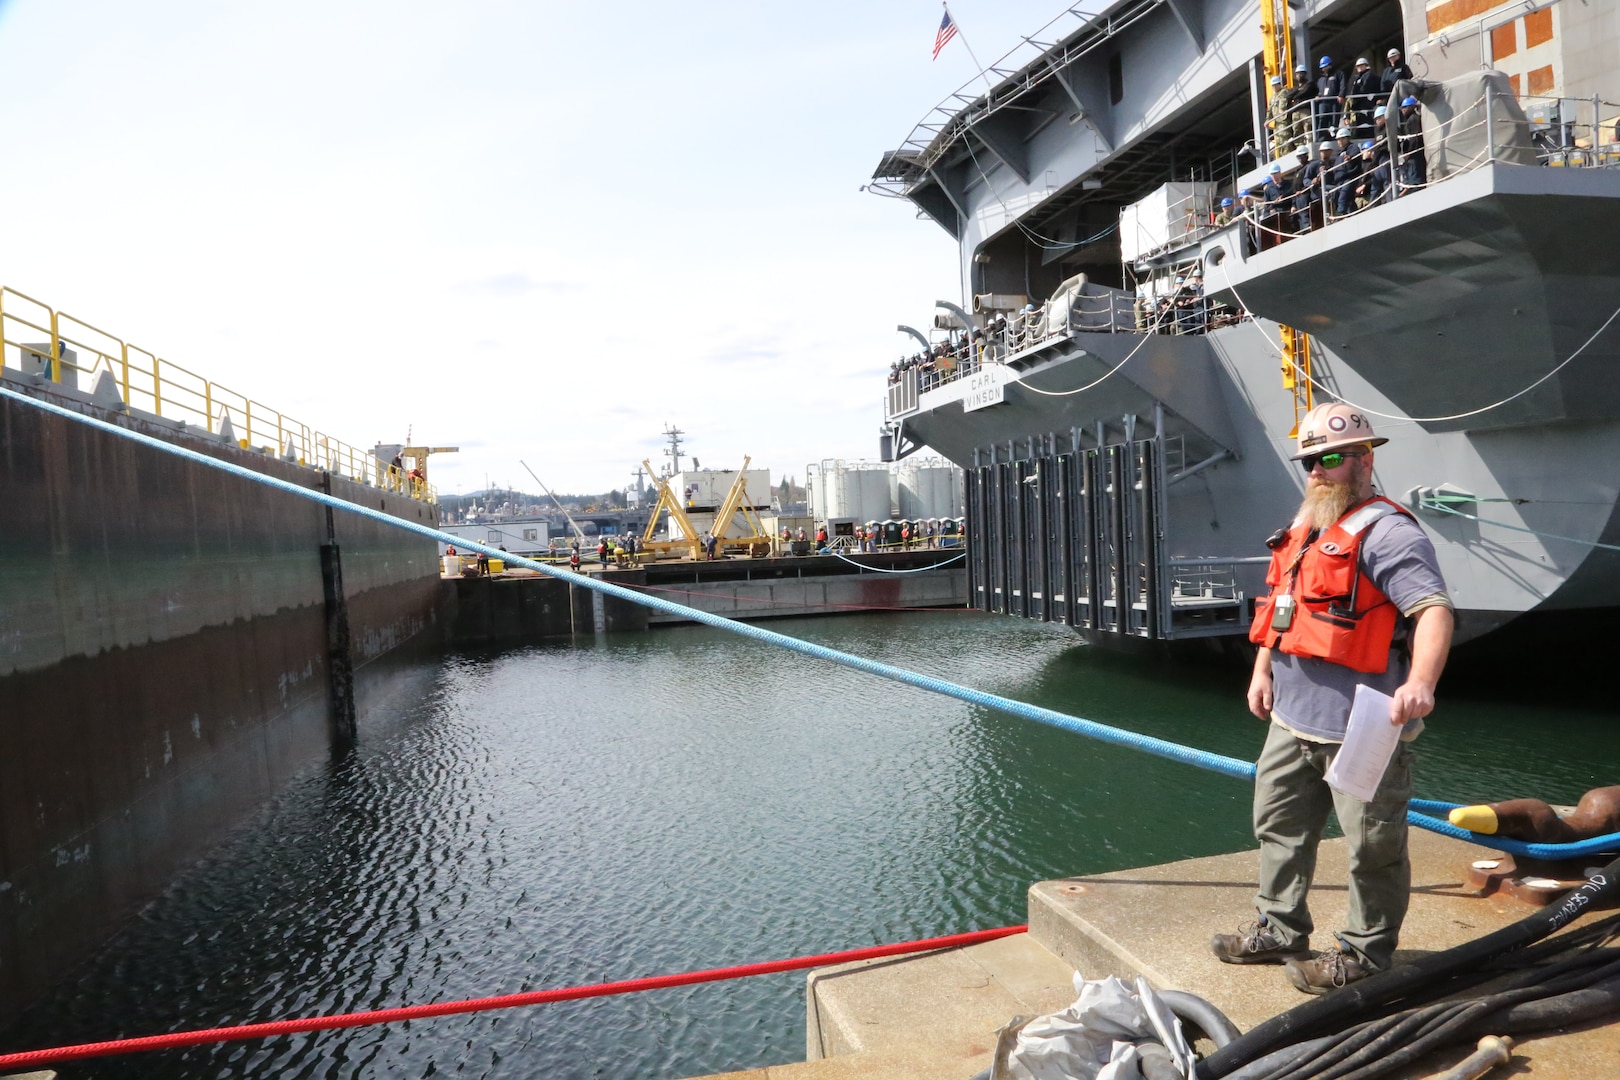 USS Carl Vinson (CVN 70) departed Dry Dock 6 April 6, 2020, after spending 14 months undergoing a Docking Planned Incremental Availability period at Puget Sound Naval Shipyard & Intermediate Maintenance Facility.